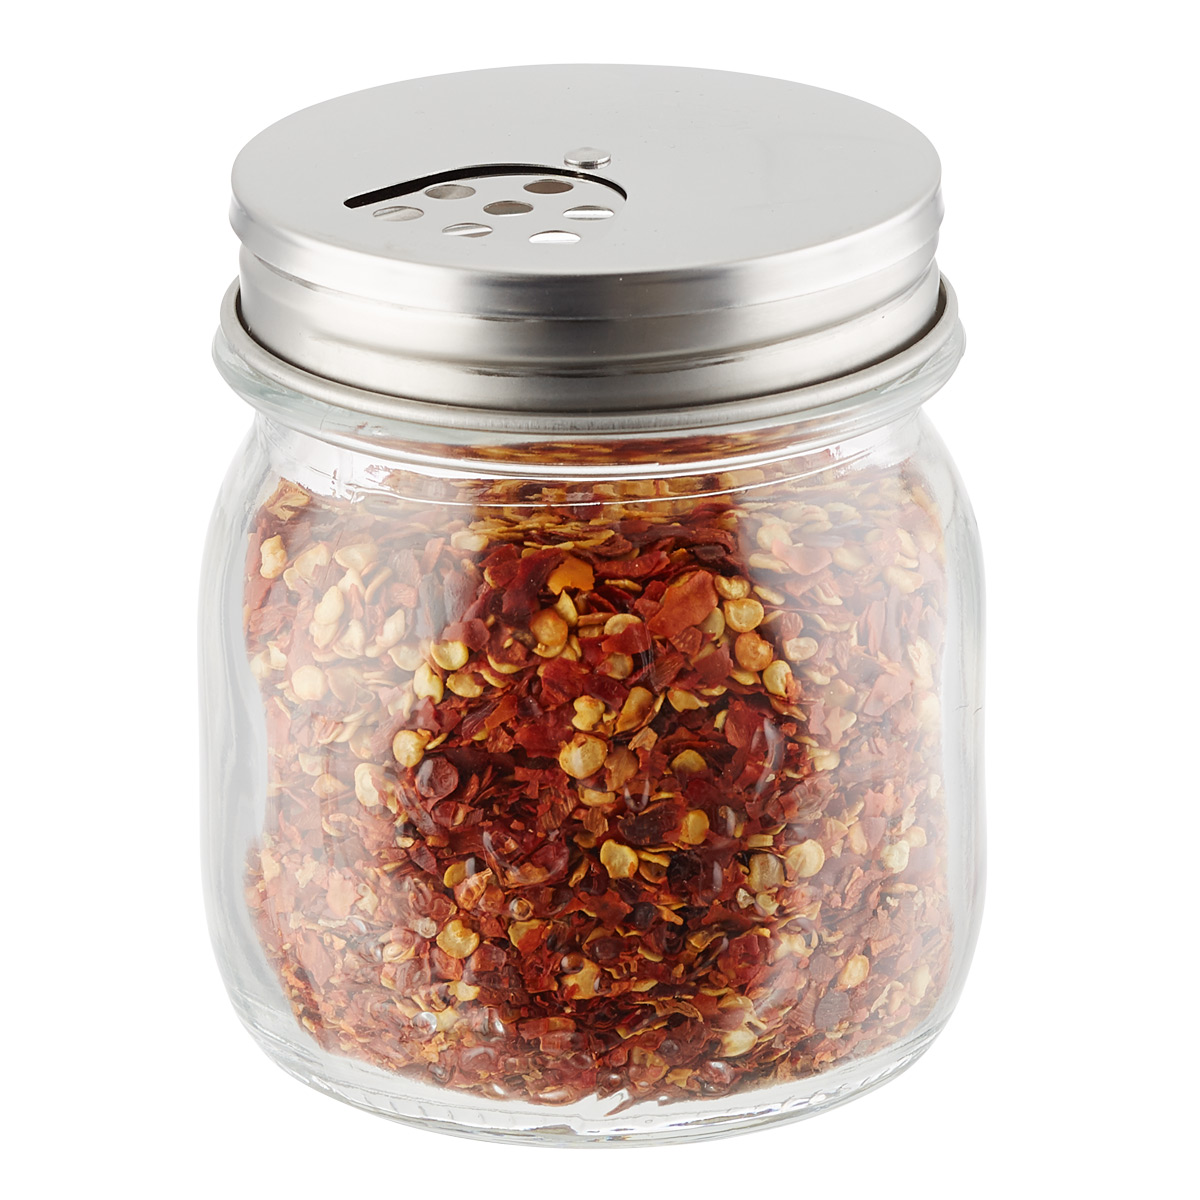 https://www.containerstore.com/catalogimages/379953/10079540-glass-shaker-with-lid.jpg